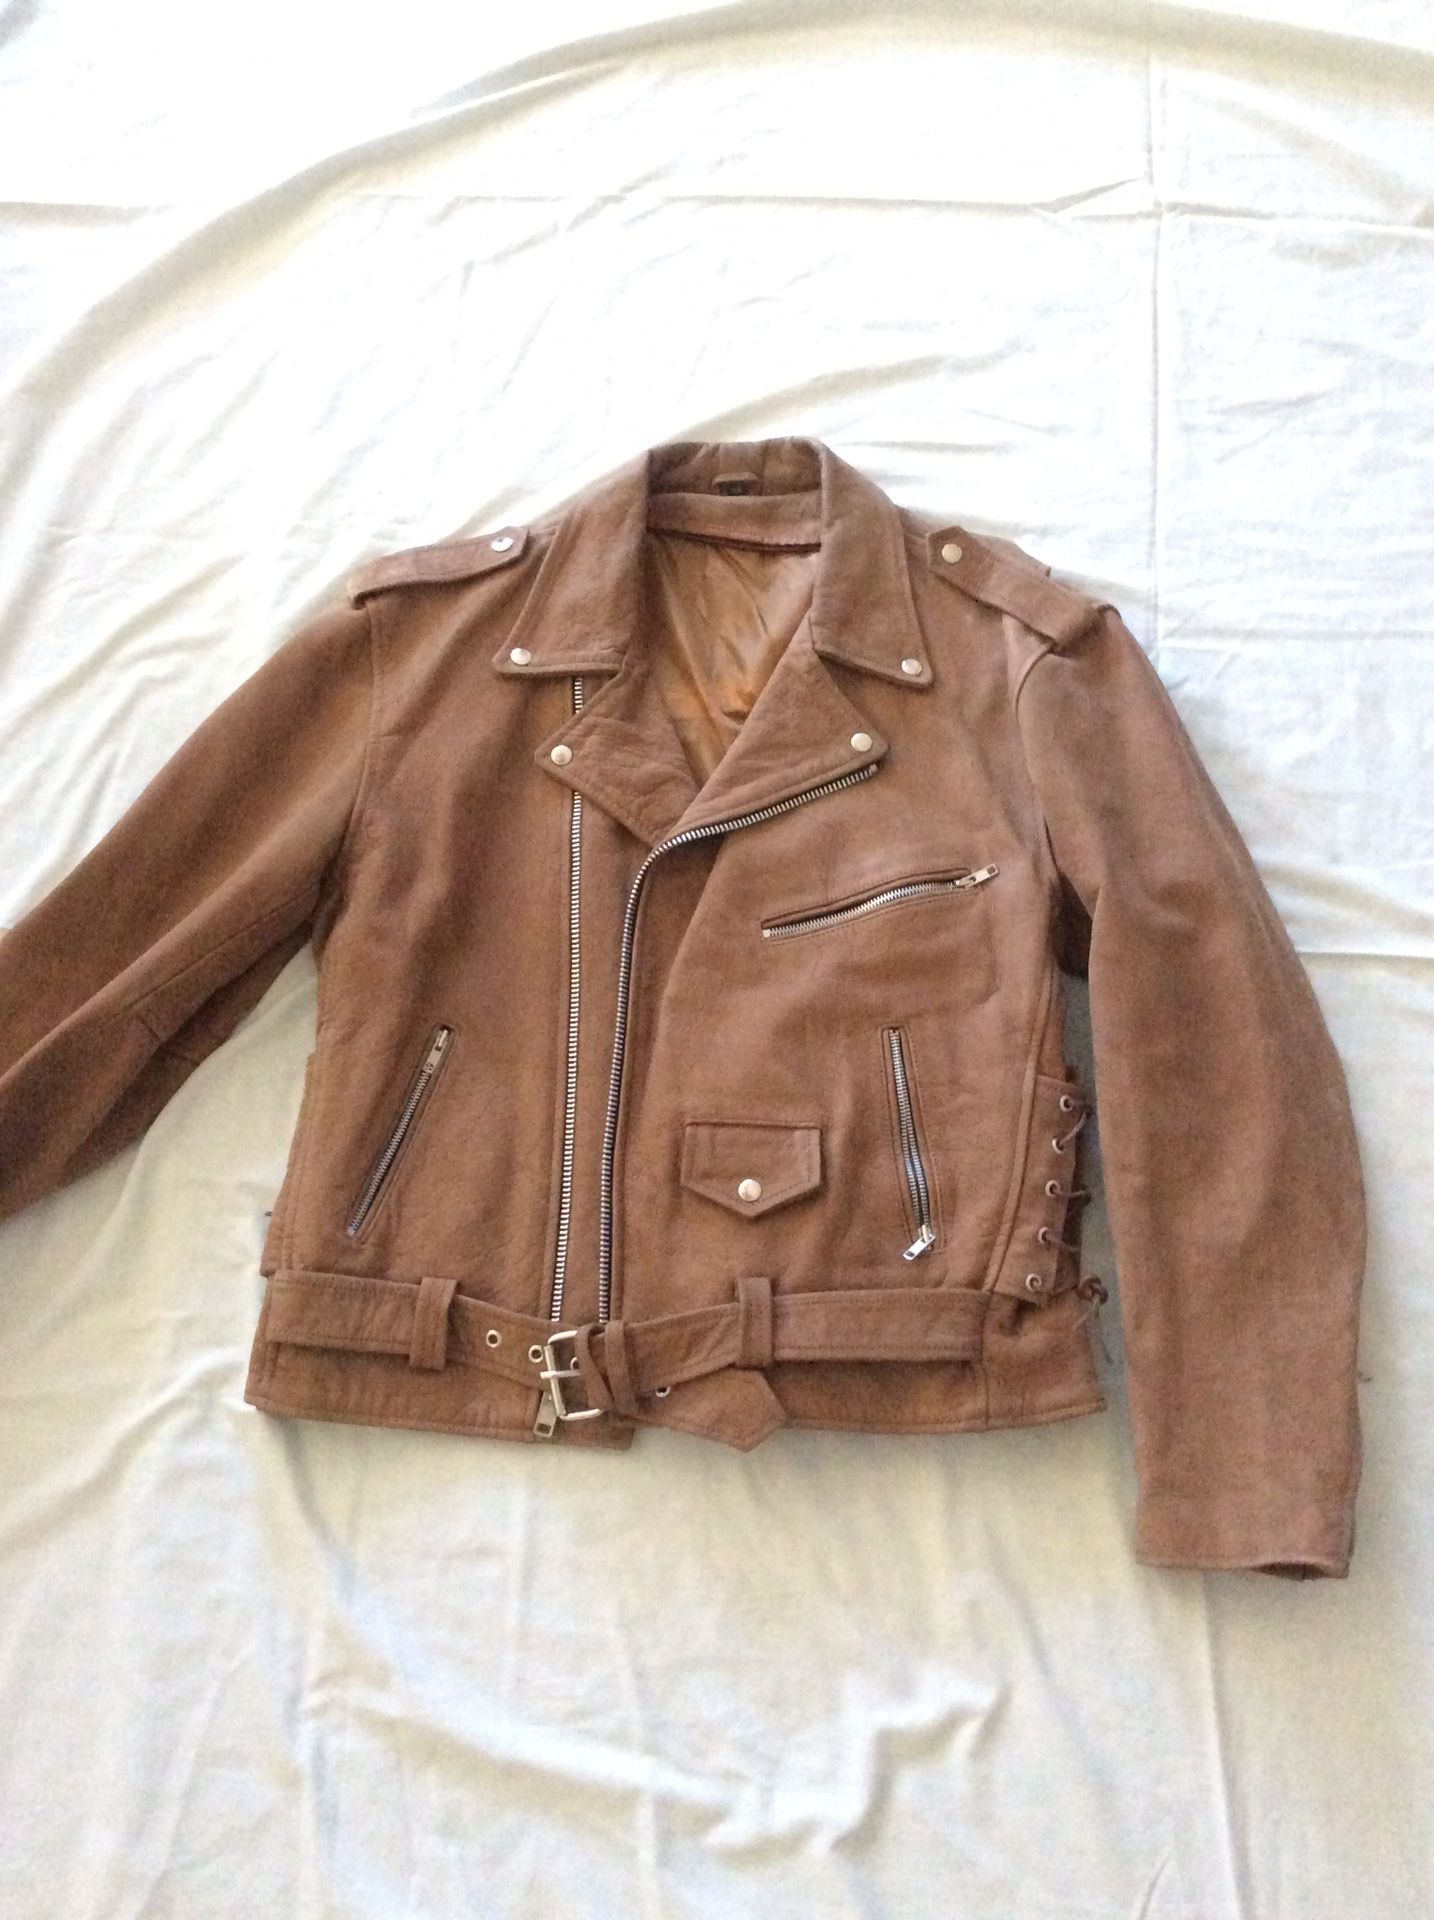 Motorcycle jacket, chaps and duster